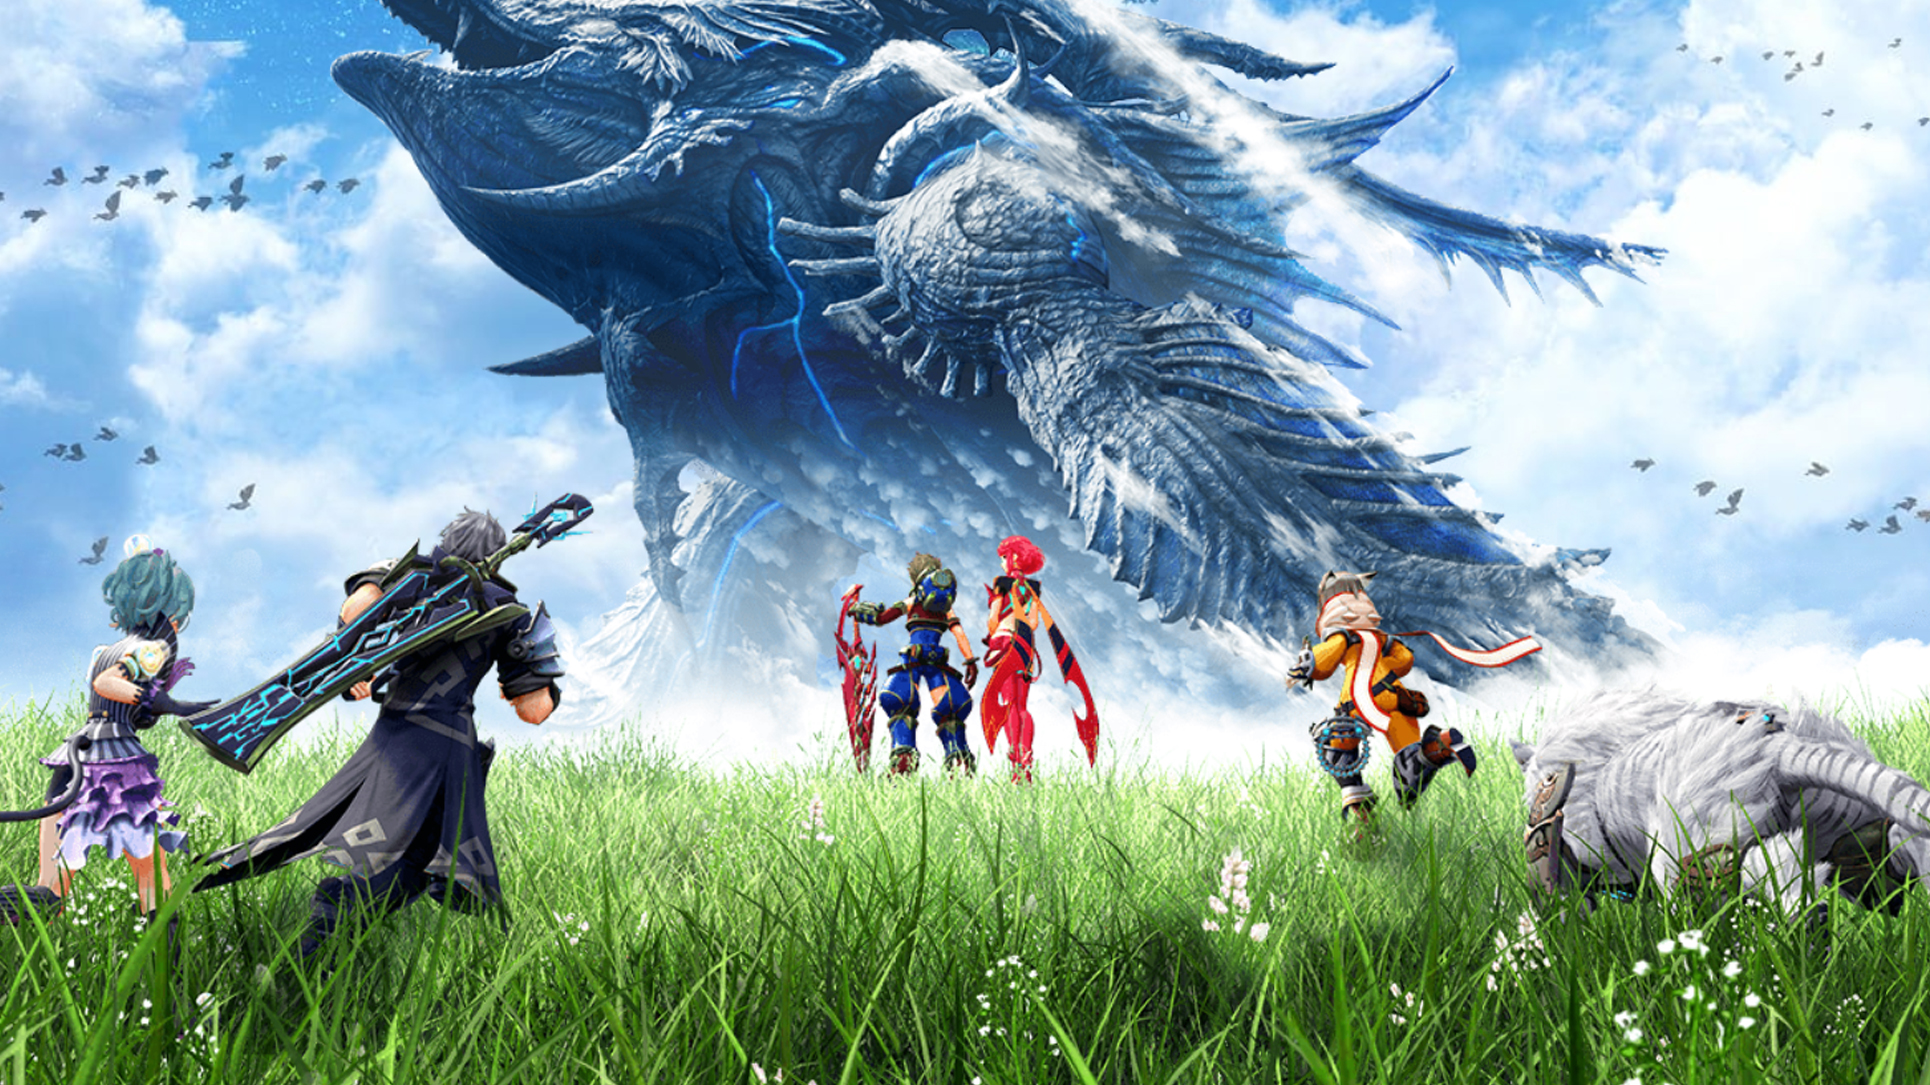 Xenoblade Chronicles 2 Shows off It's Goods.